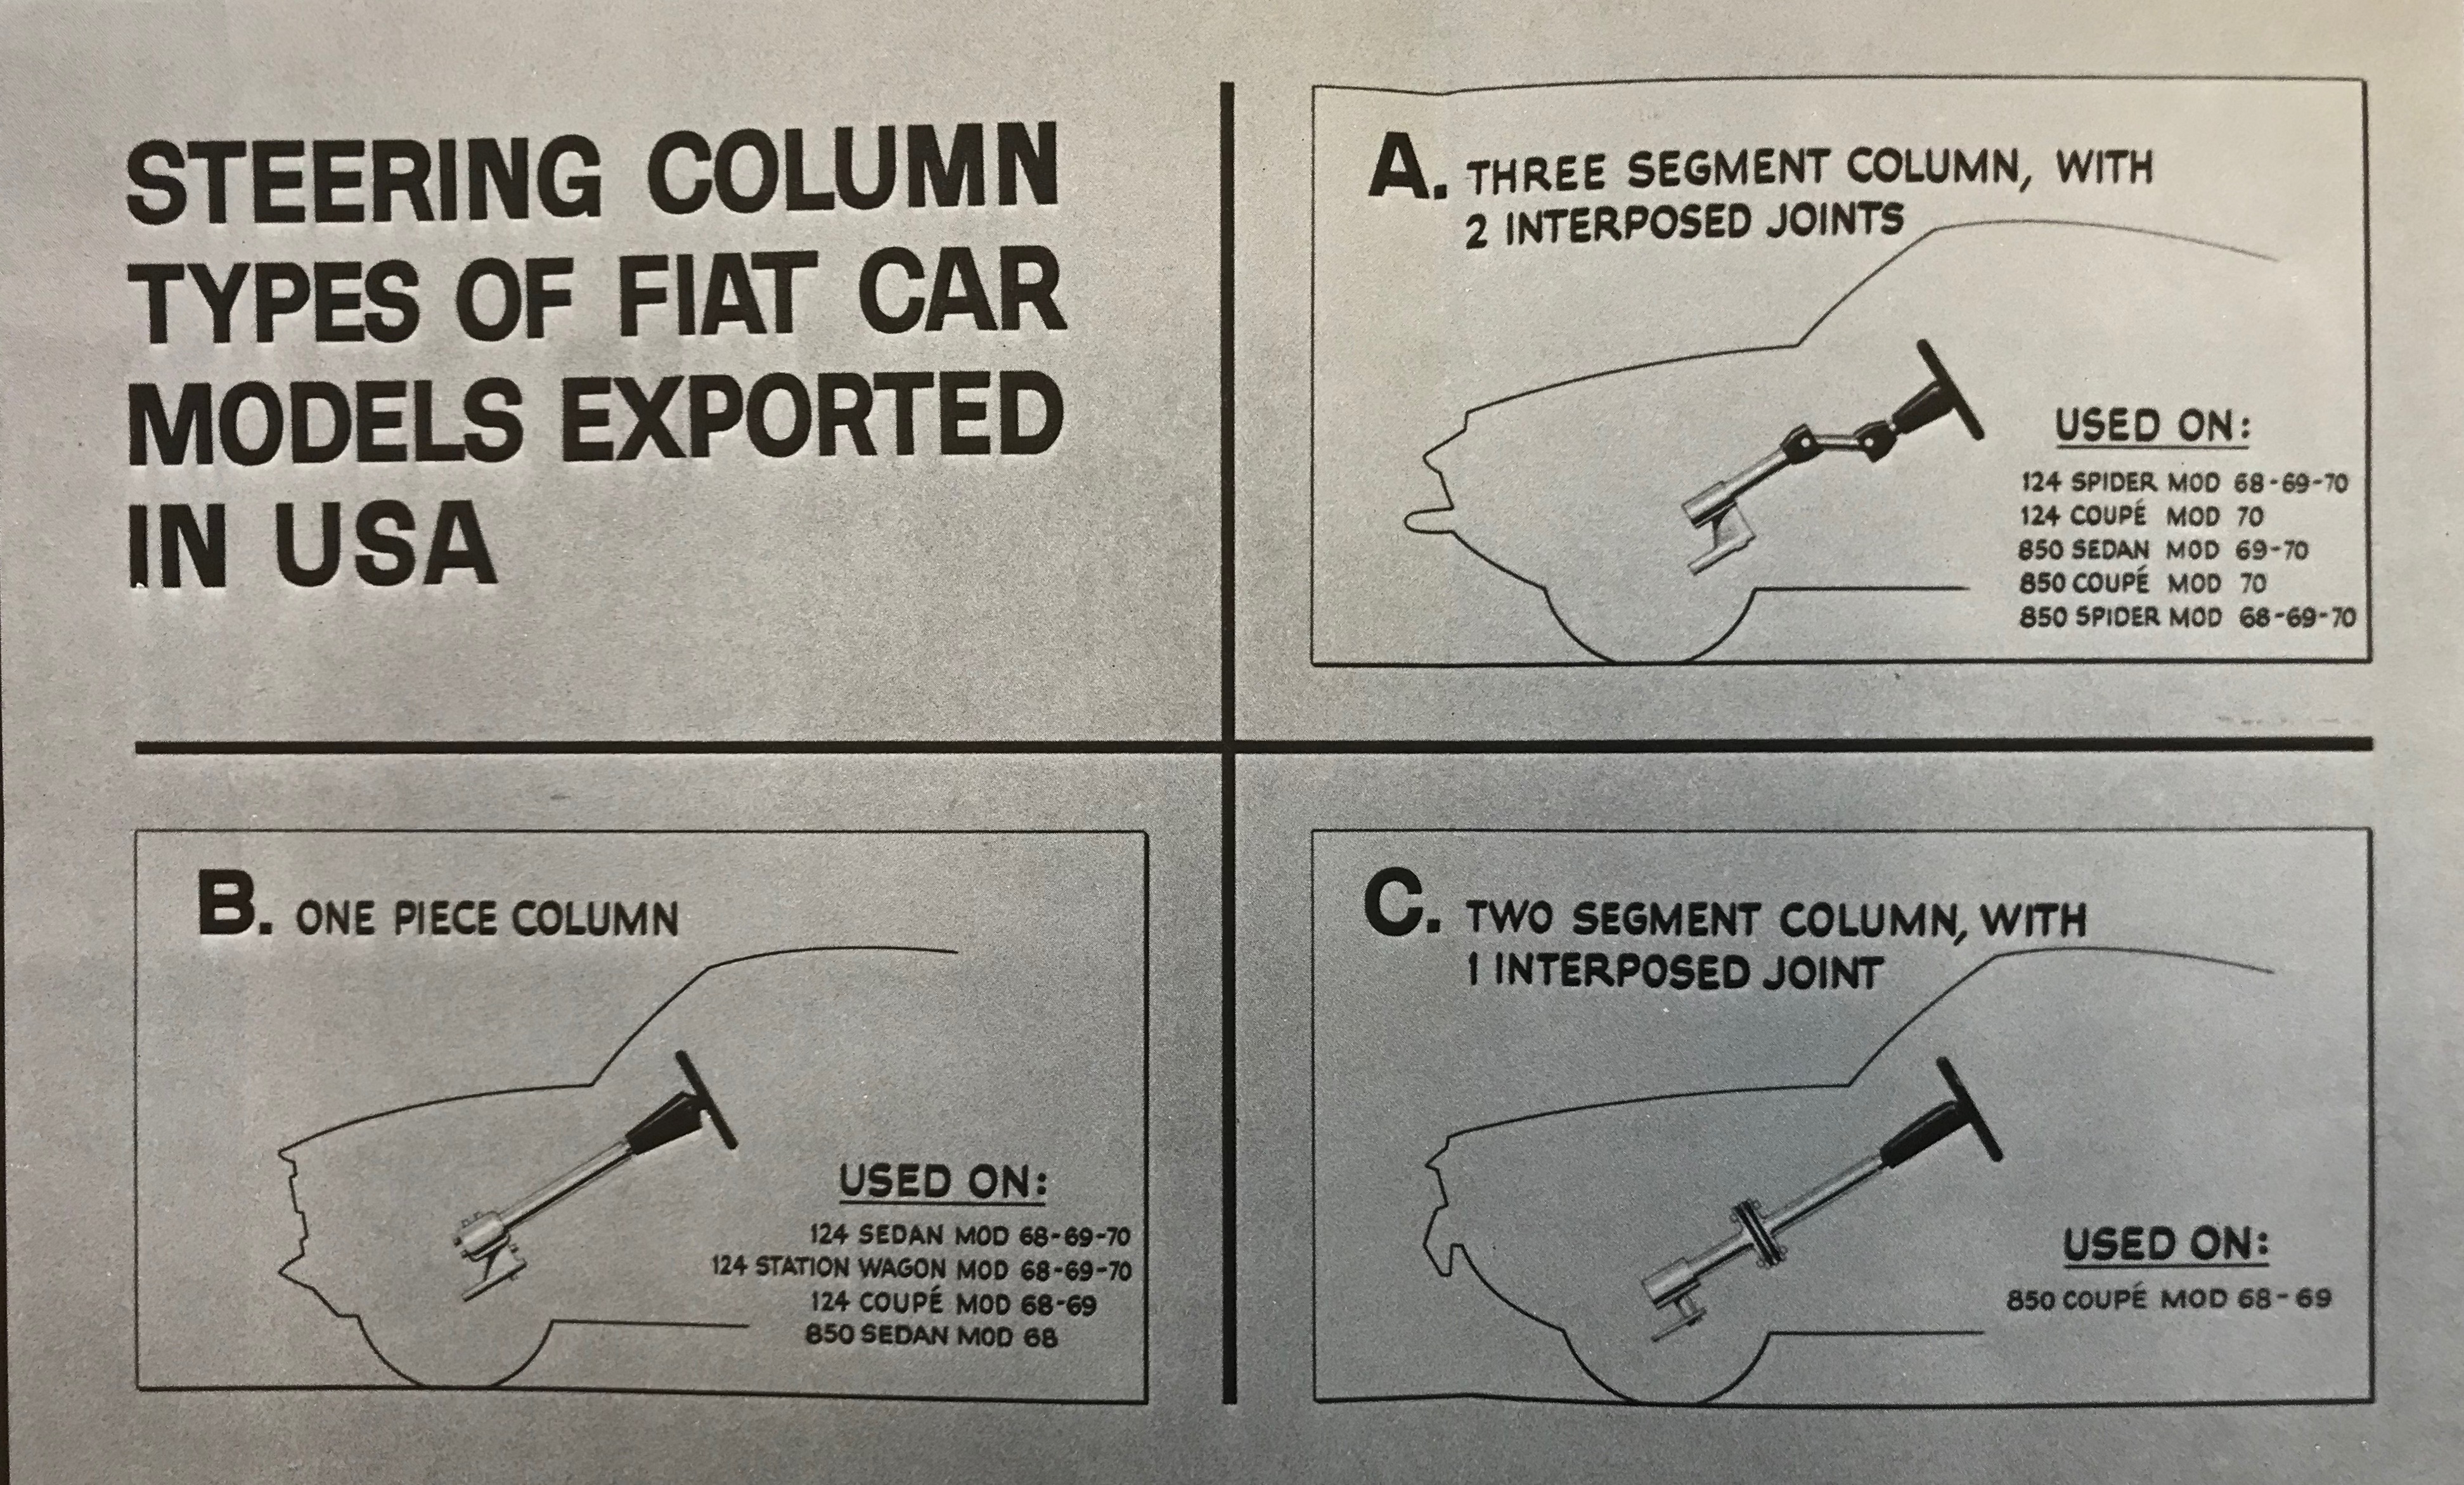 Diagram of Three Fiat Steering-Columns - The Bottom Two Failed Safety Standards